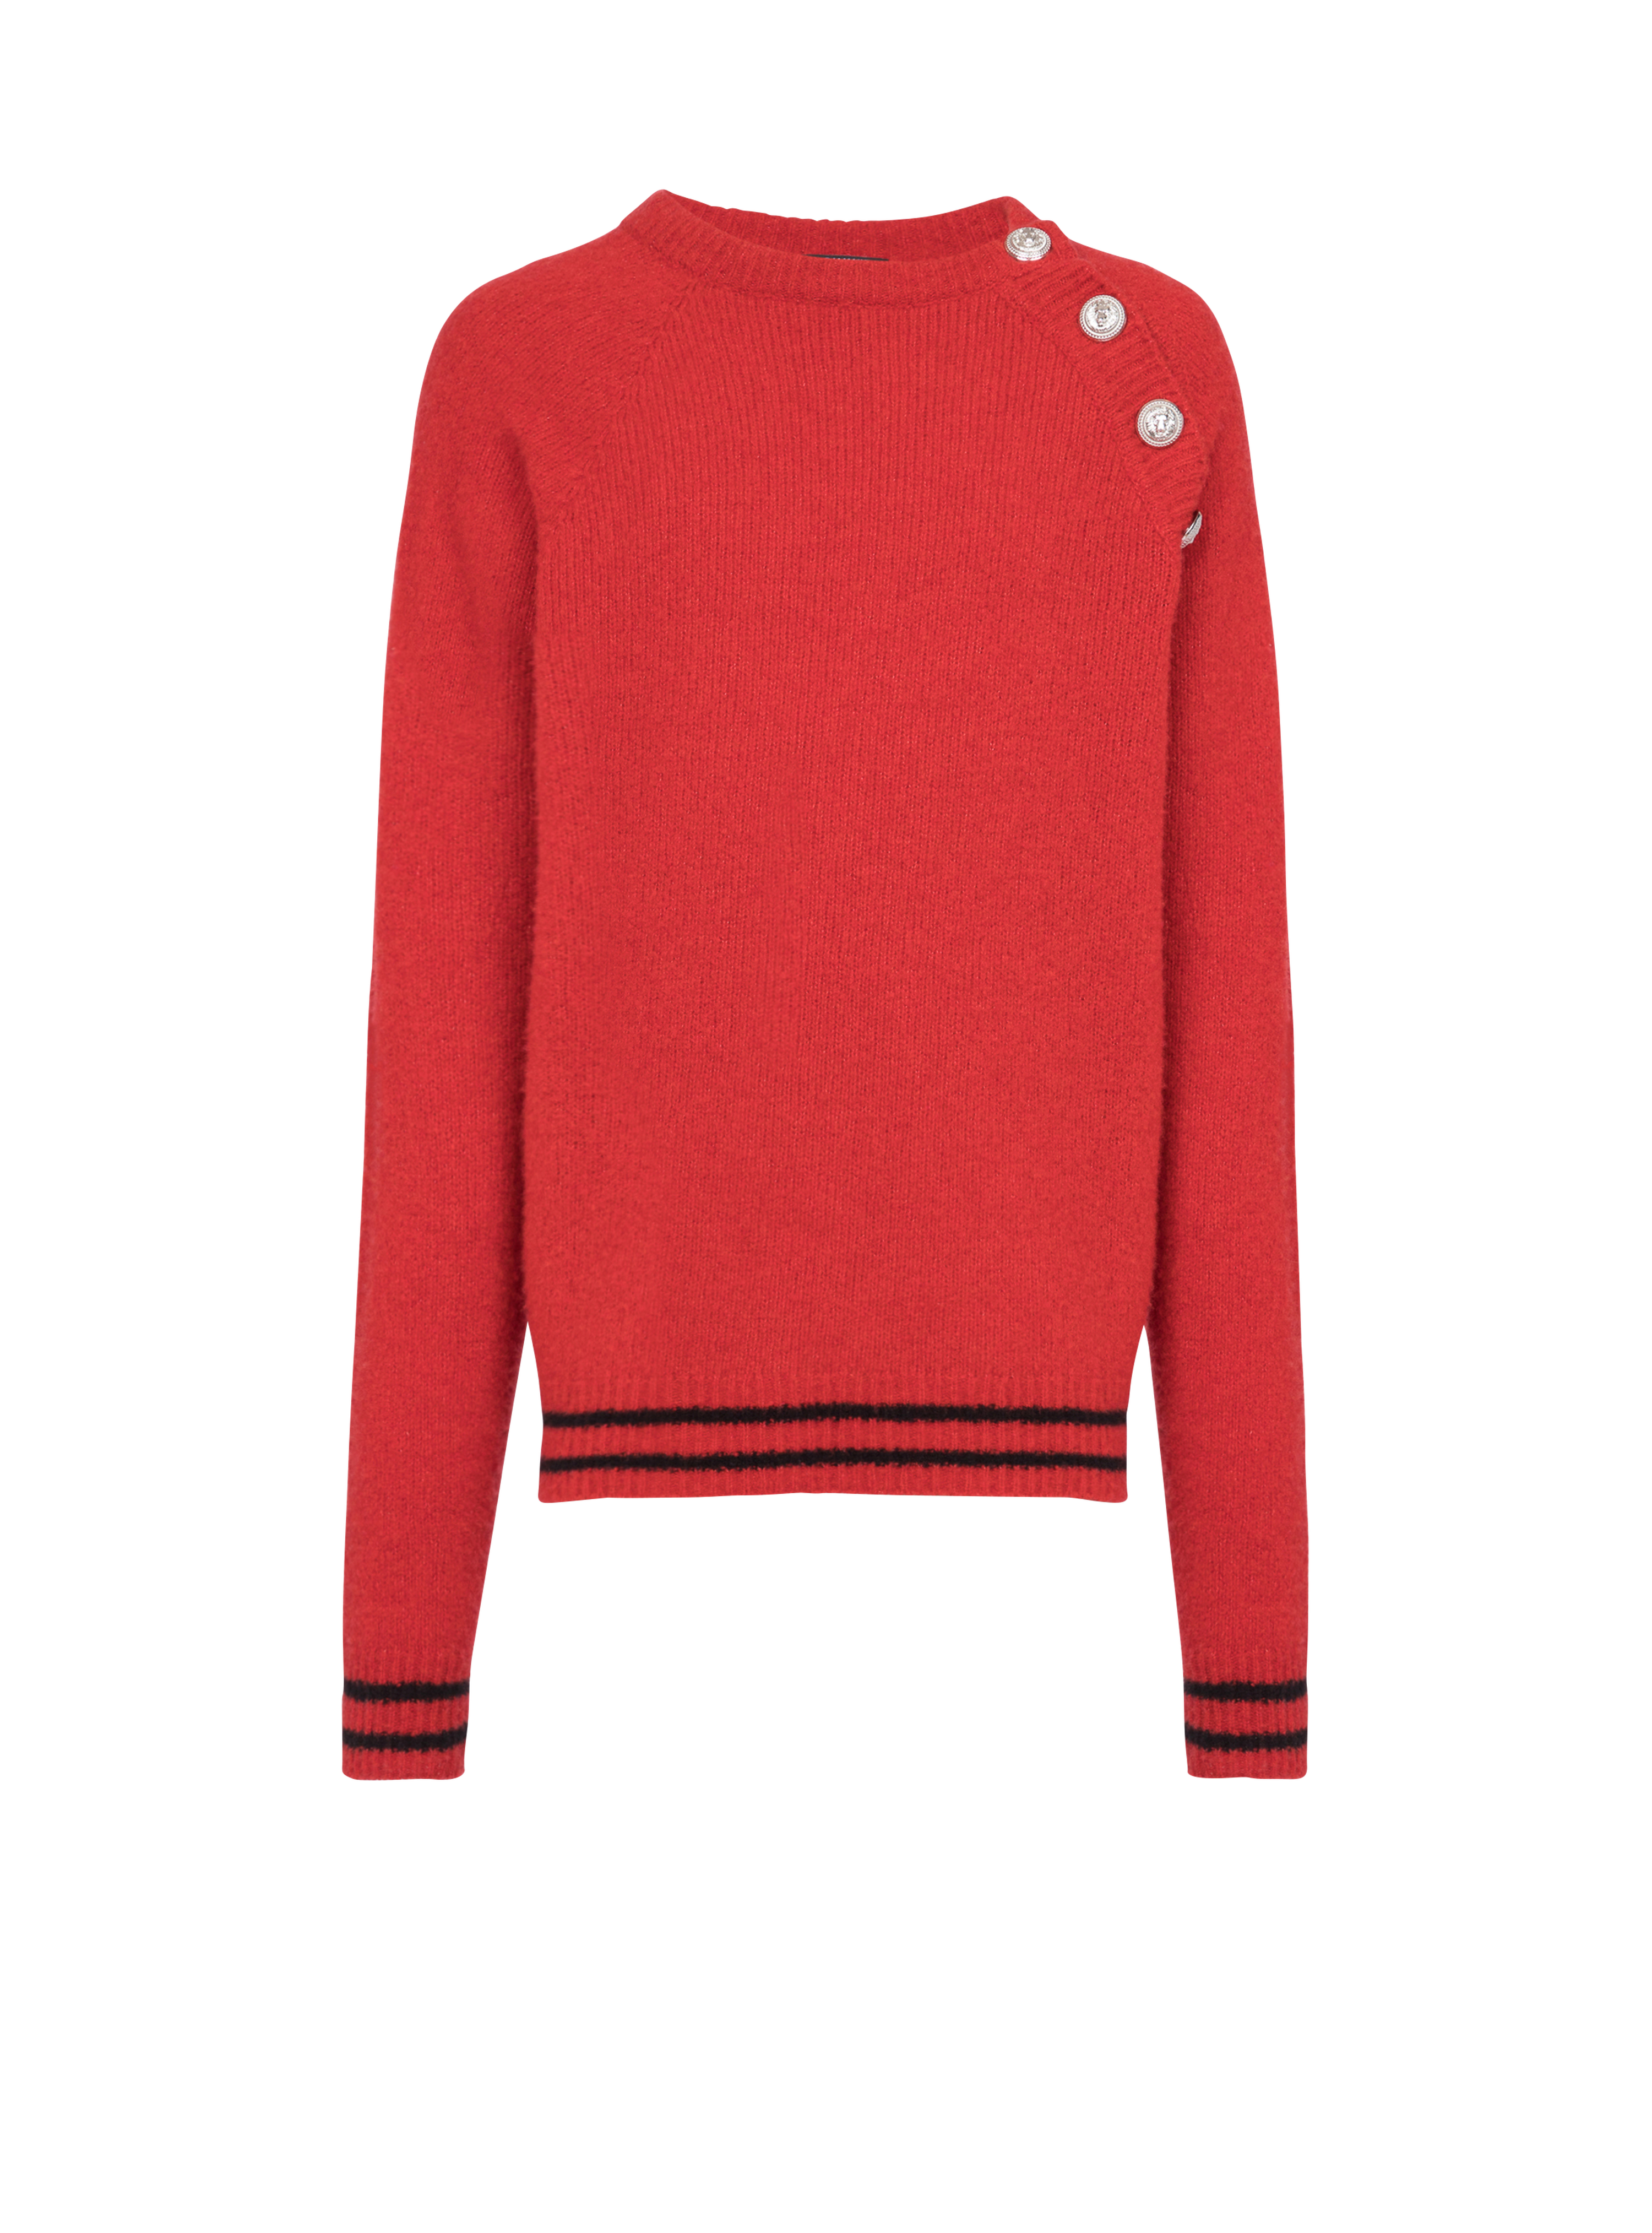 Cashmere sweater, red